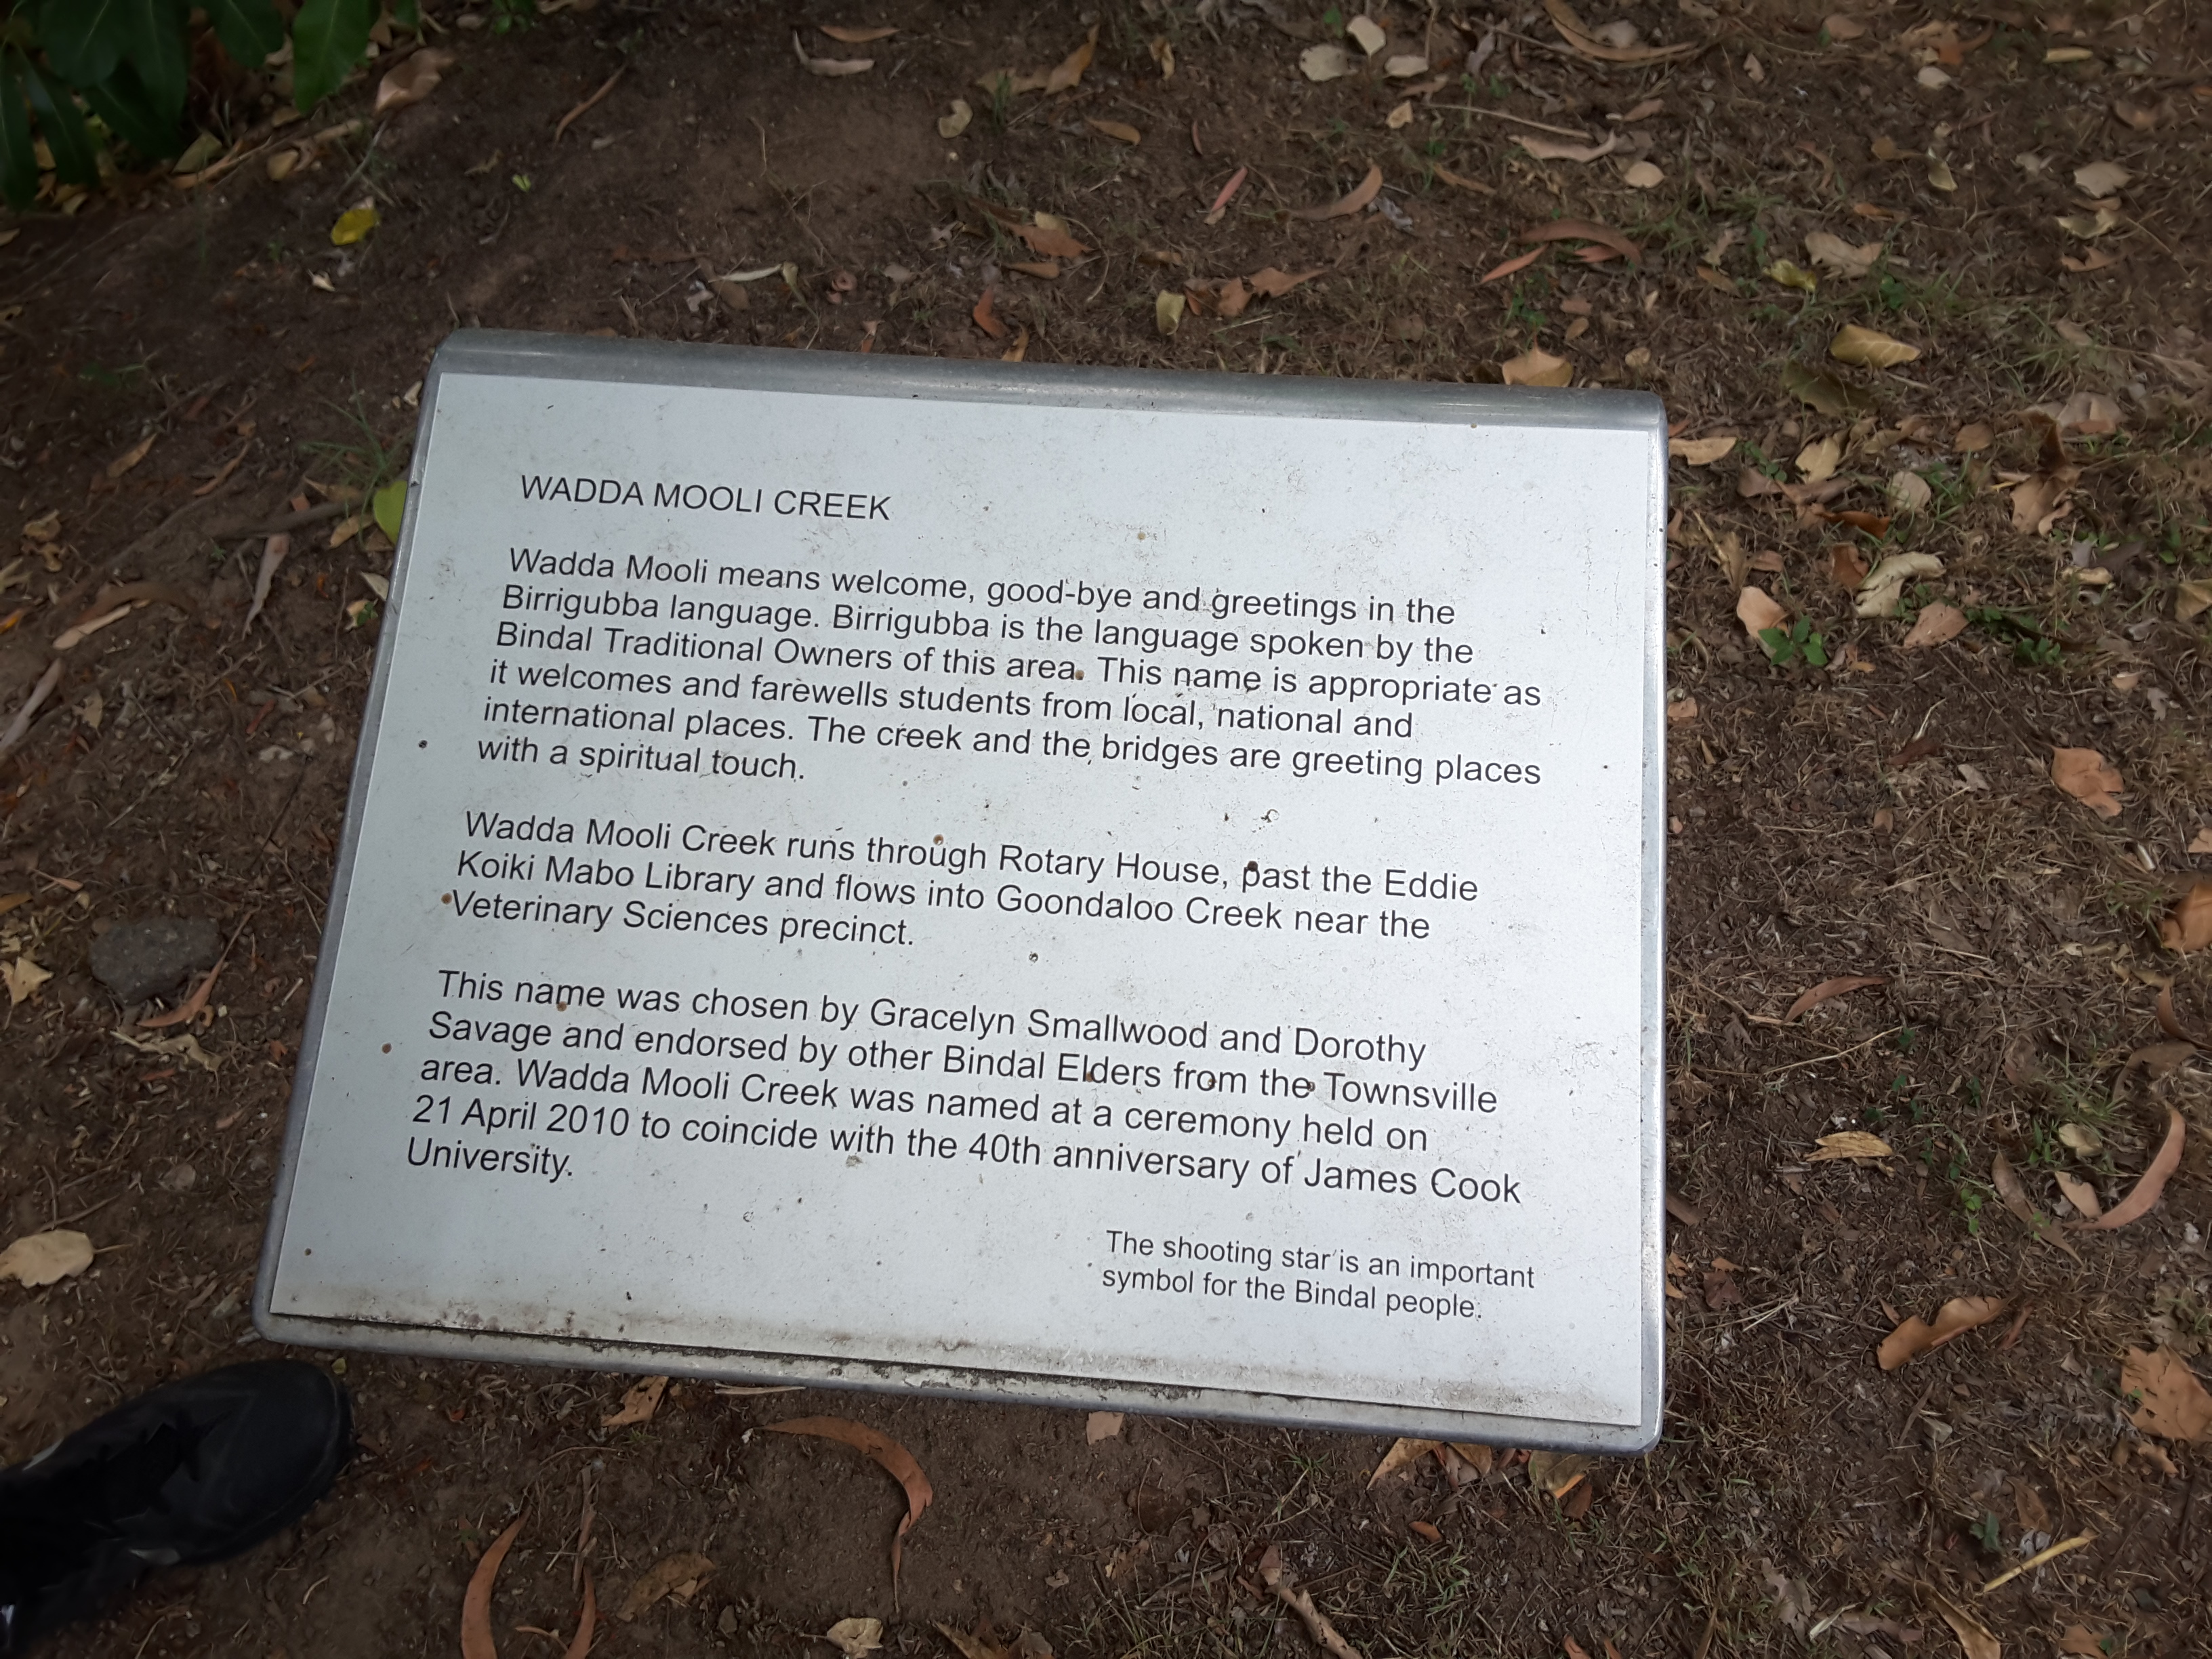 Participants took photos and gps recordings of the plaque about the creek running through JCU, which the Bindal named.